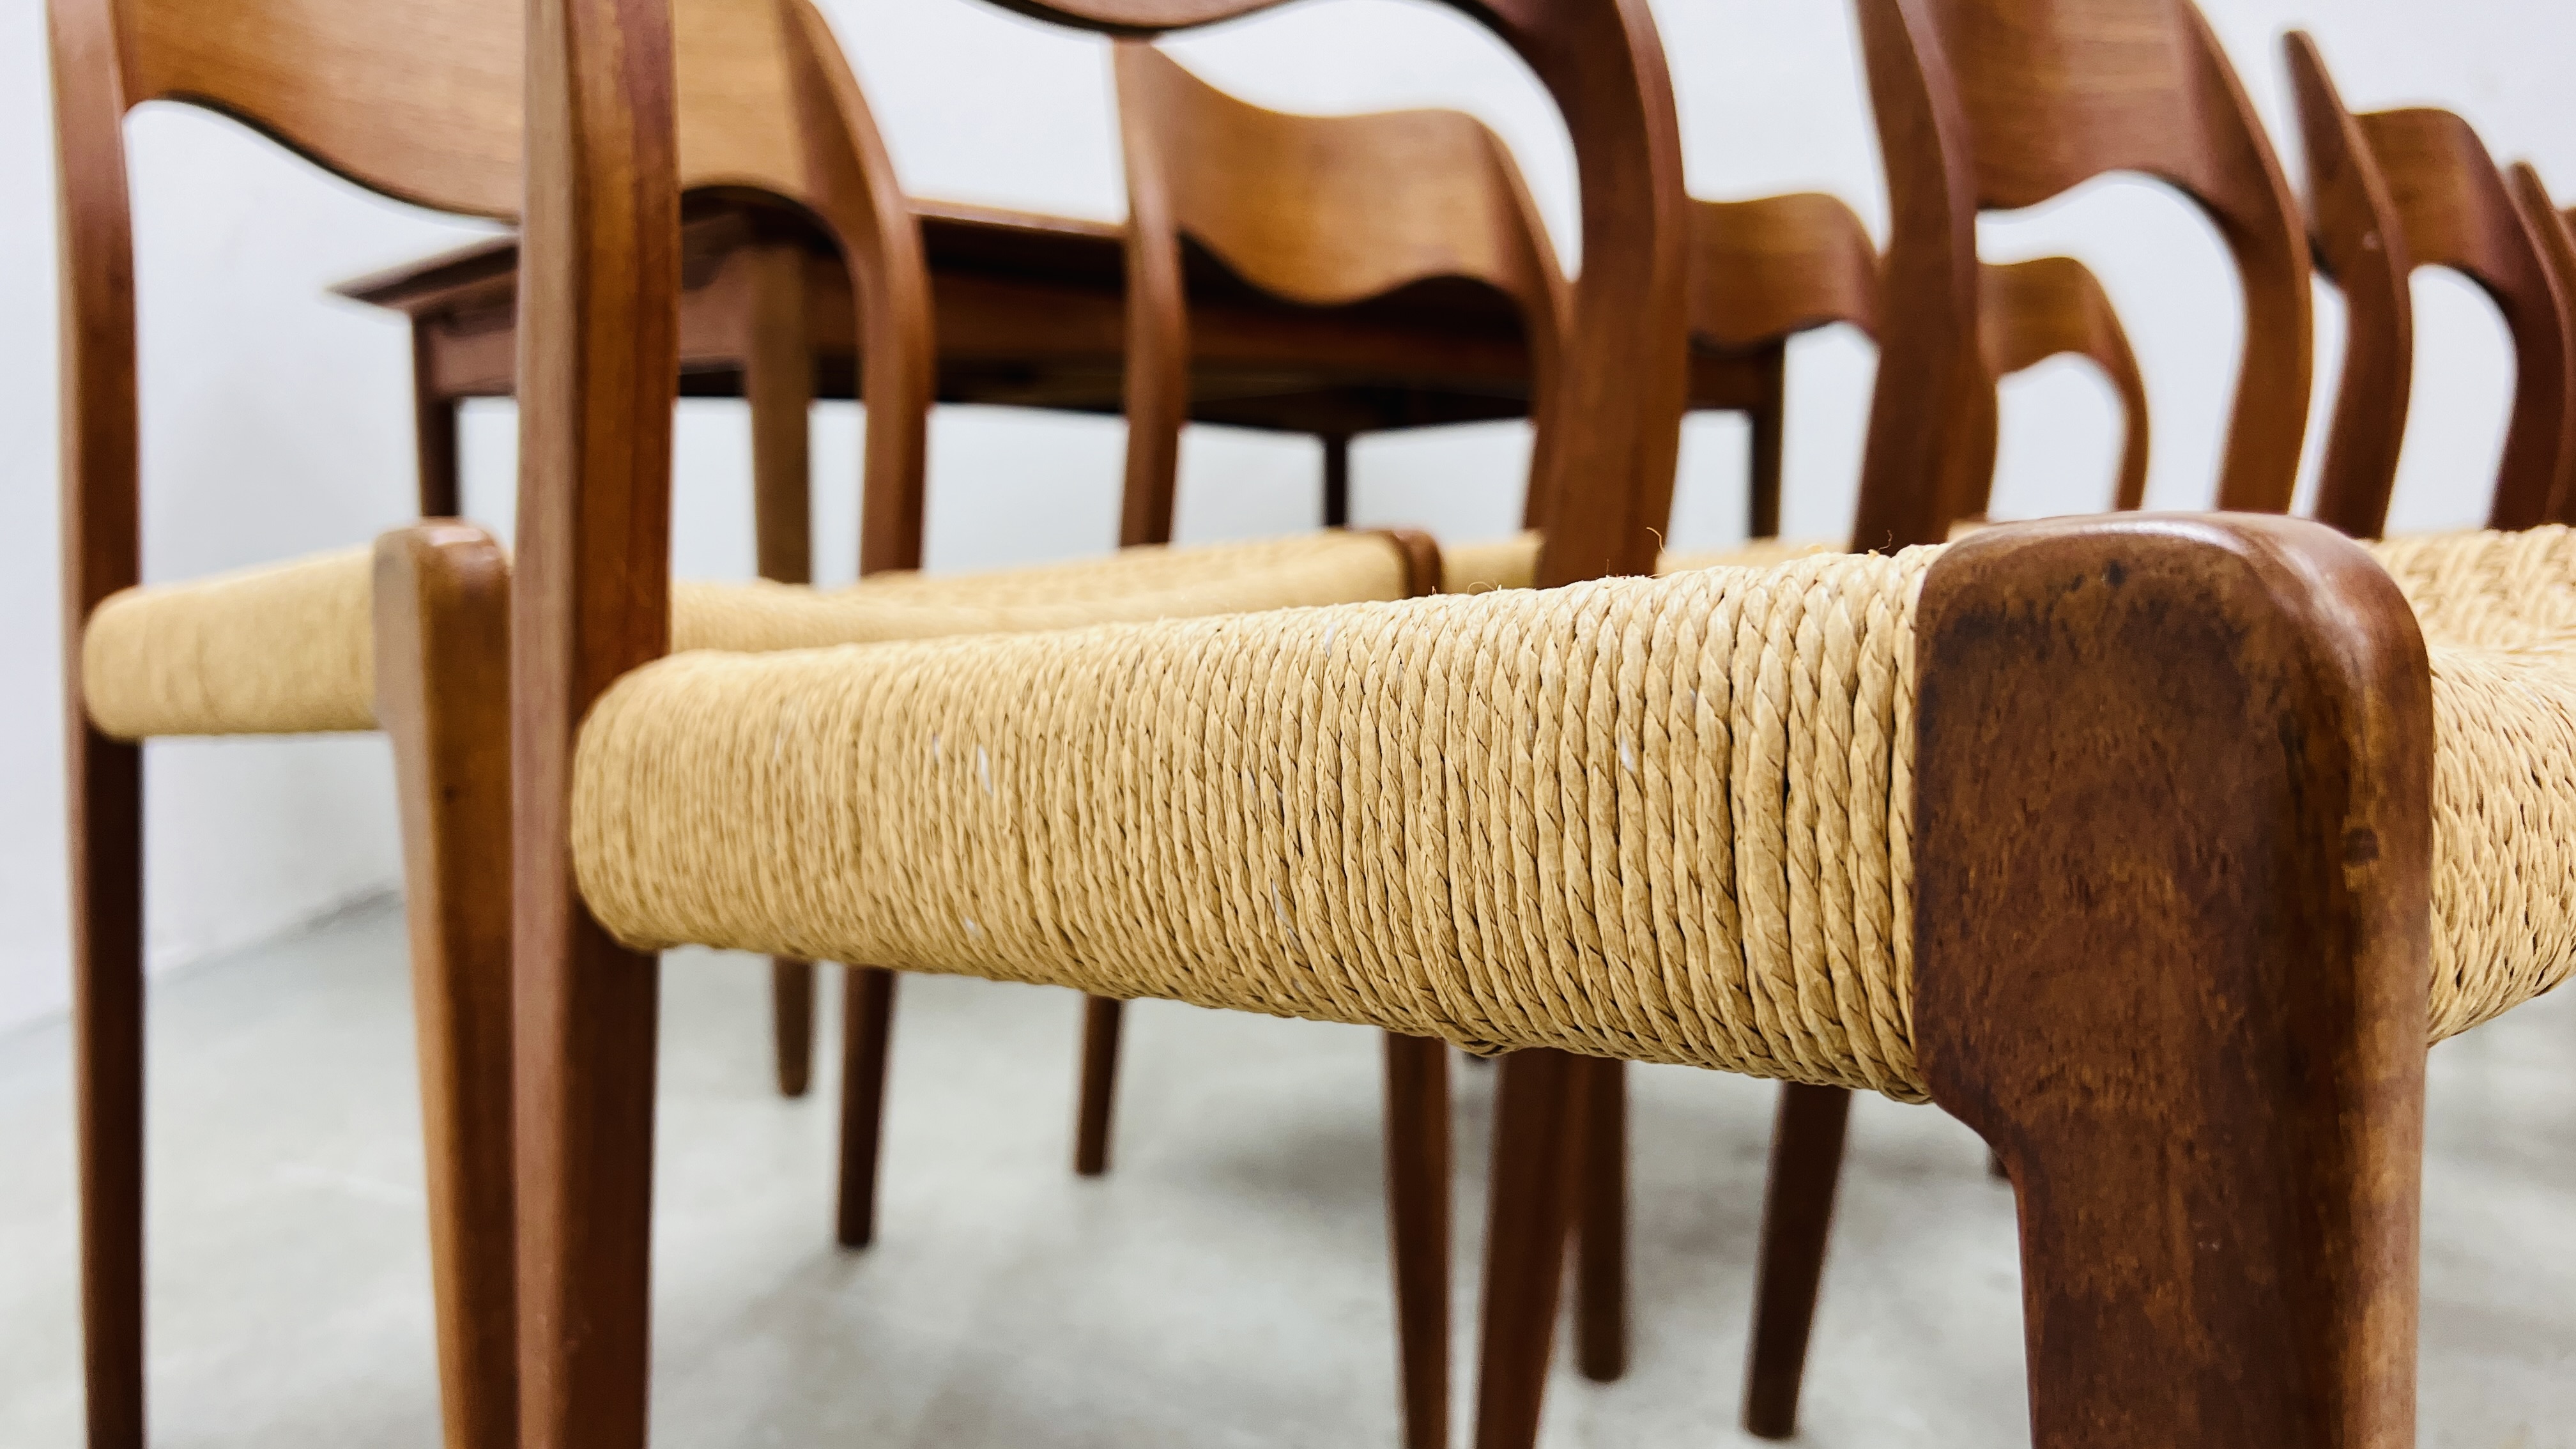 SET OF EIGHT J MOLLER DANISH TEAK DINING CHAIRS WITH WOVEN SISAL SEATS ALONG WITH A DRAWER LEAF - Image 20 of 48